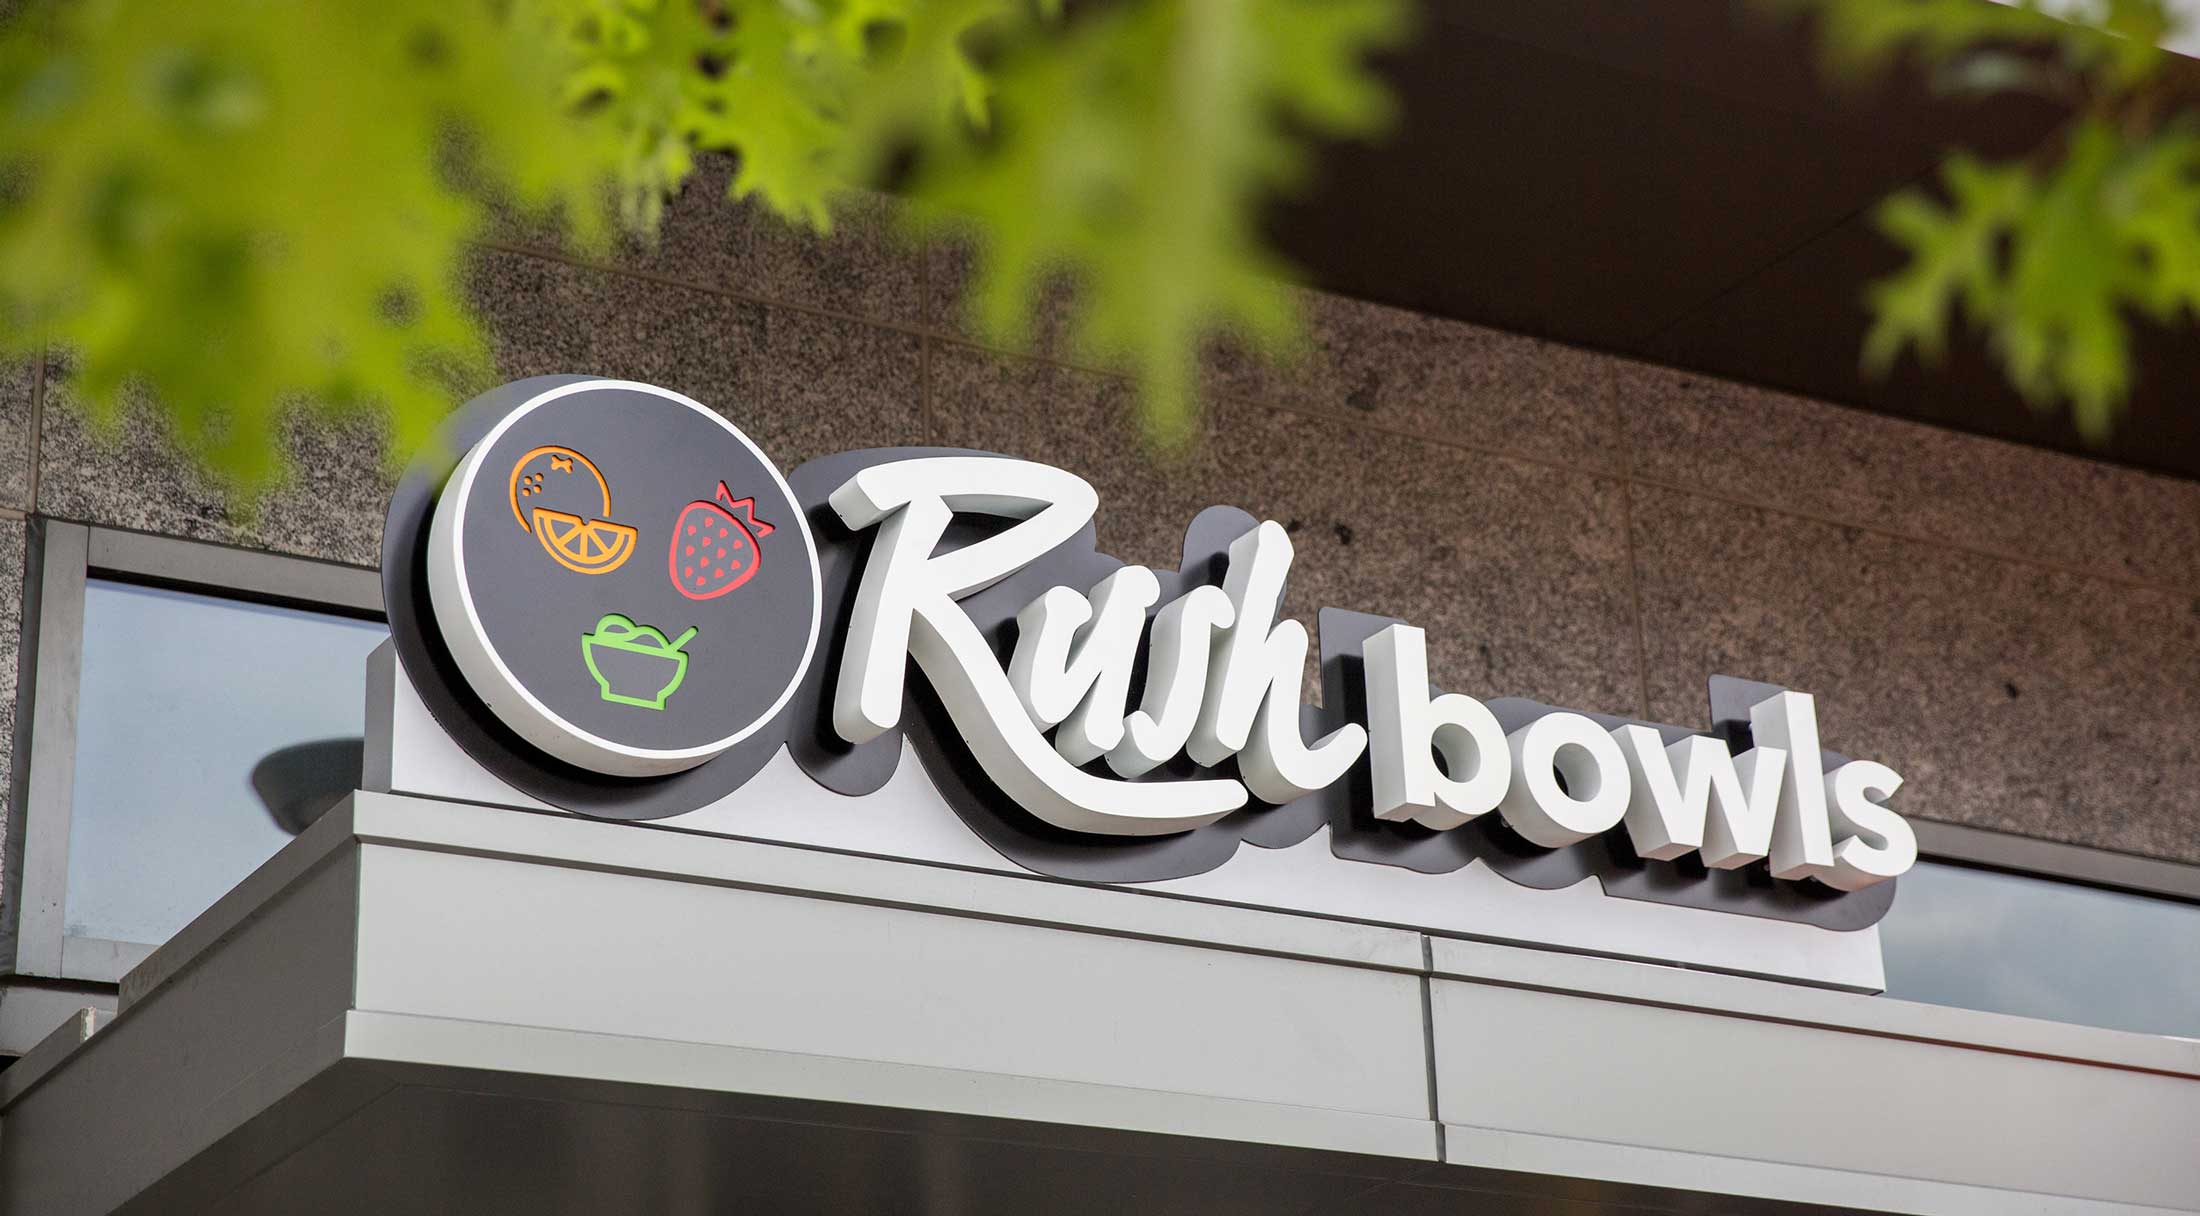 Rush Bowls store front.